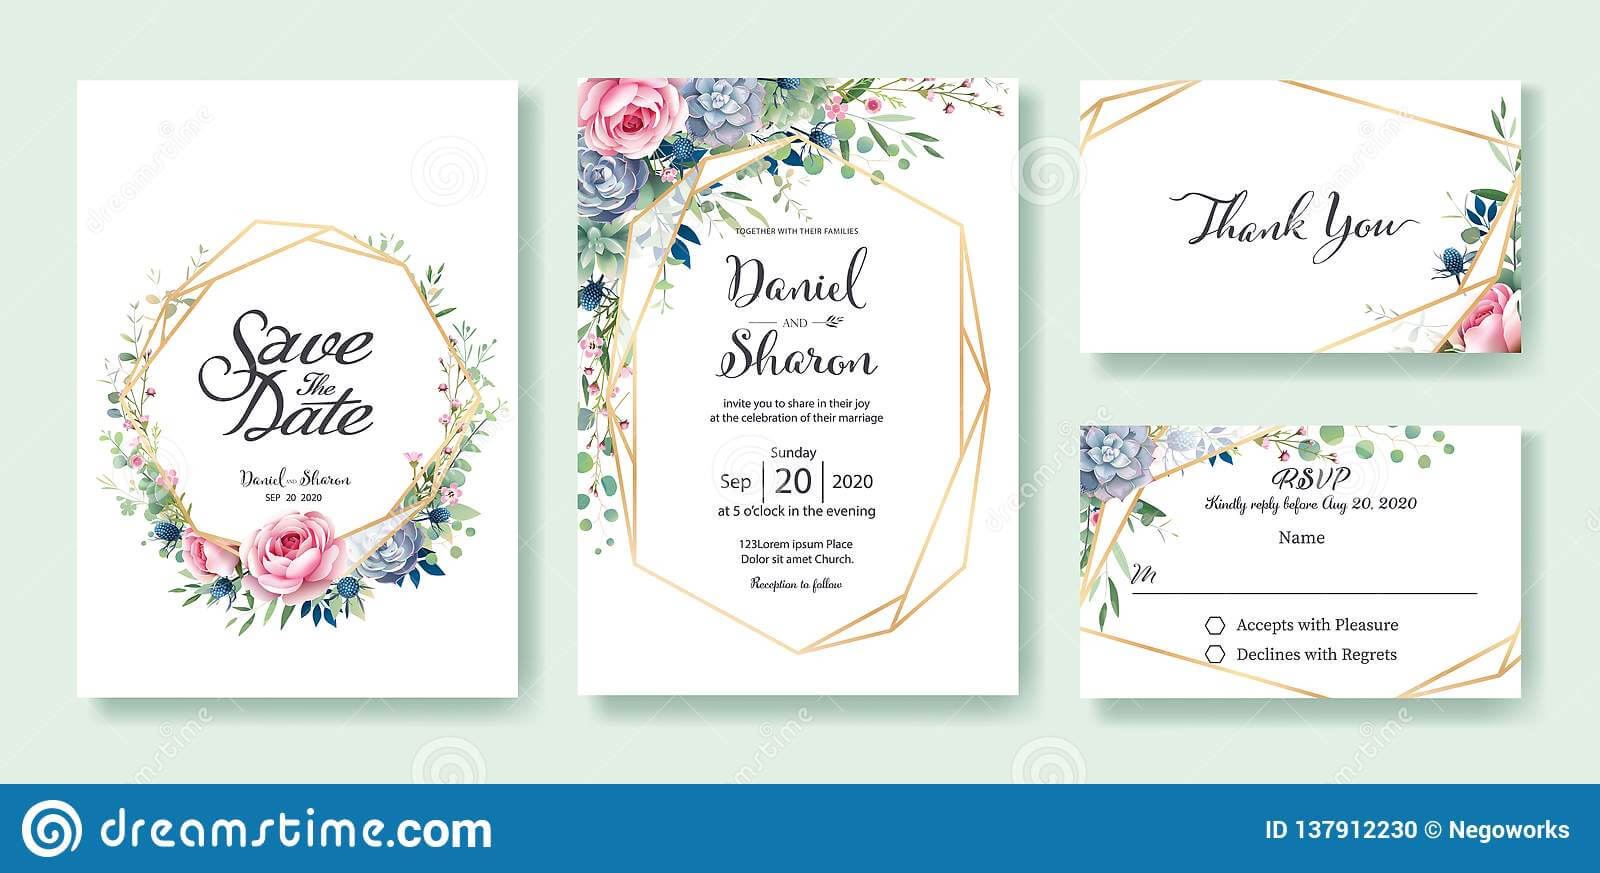 Wedding Invitation, Save The Date, Thank You, Rsvp Card Inside Template For Rsvp Cards For Wedding